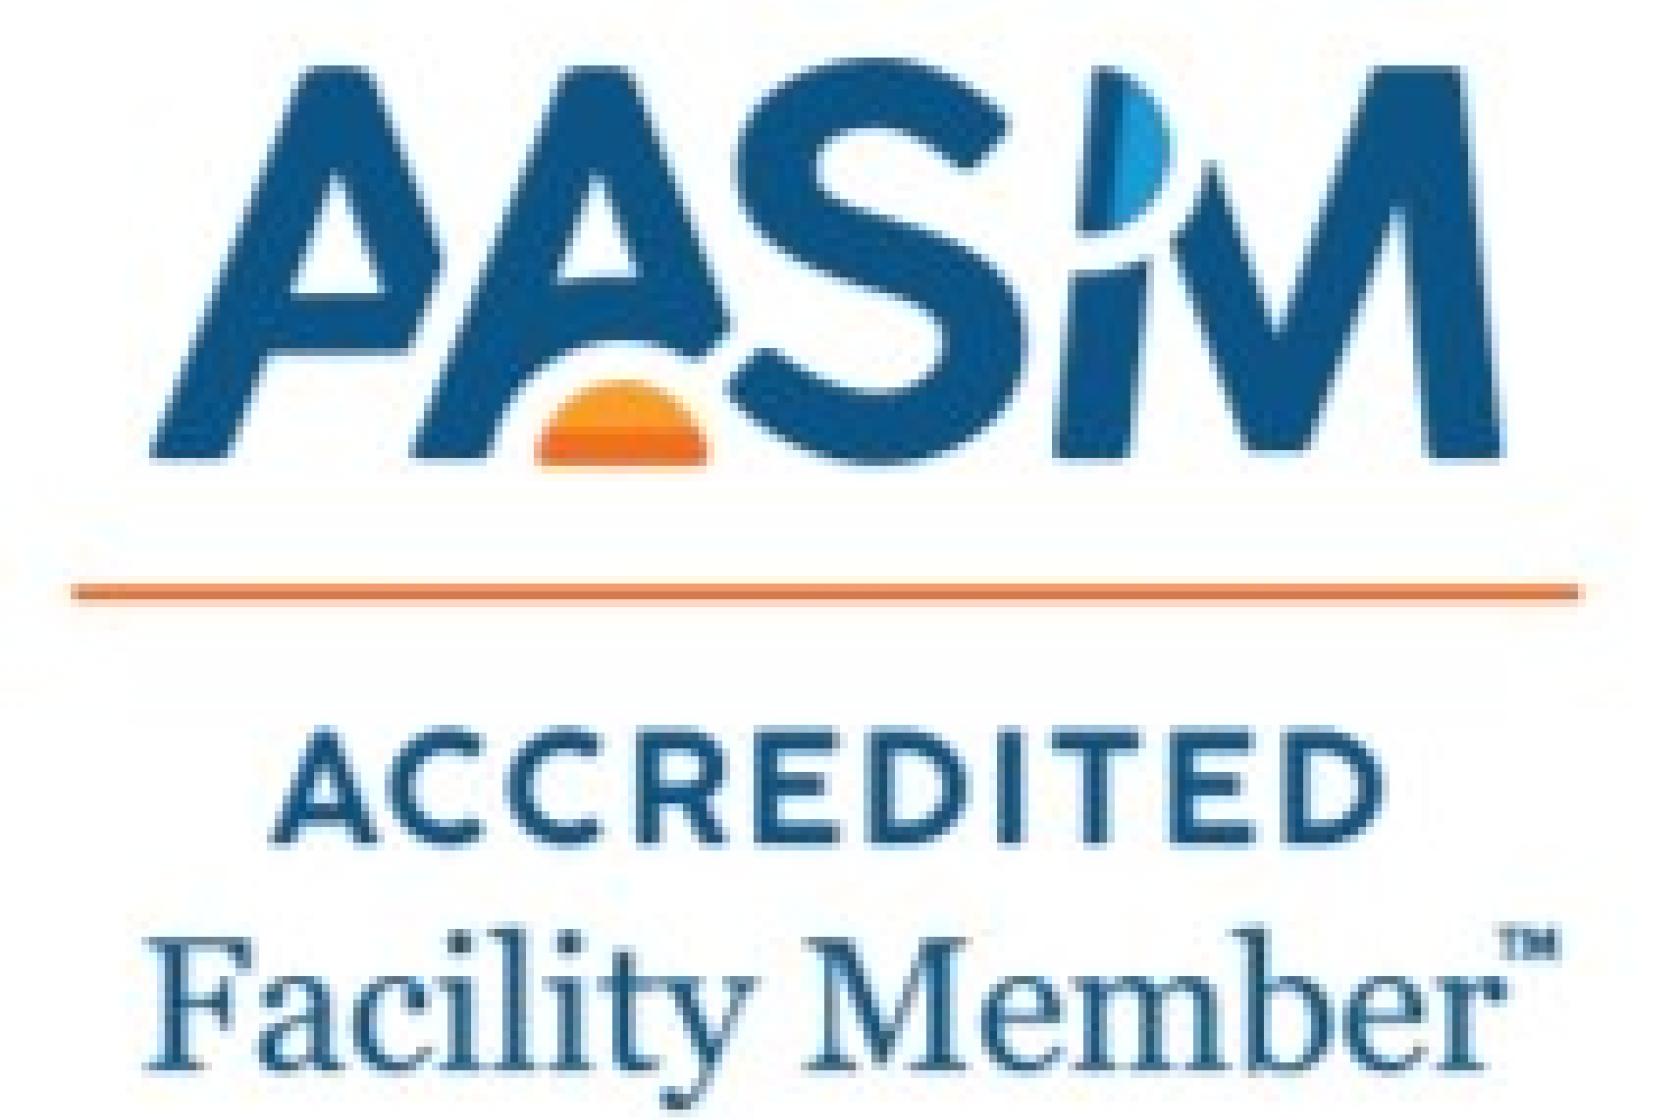 AASM Accredited Facility Member